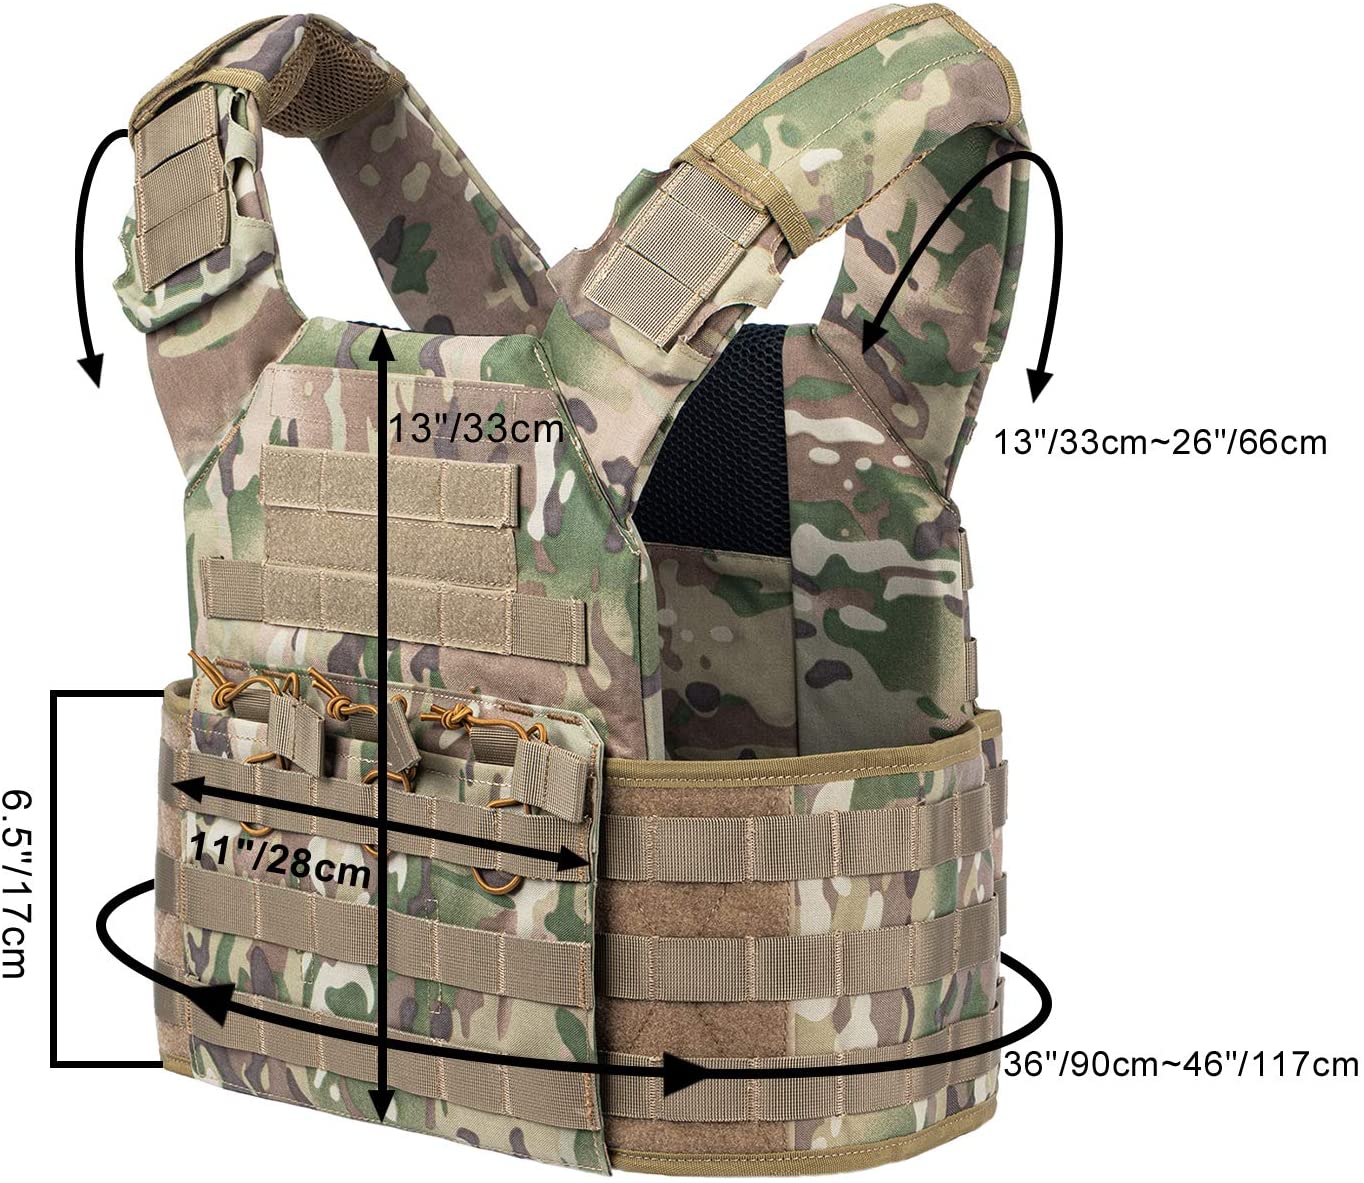 Latest molle gear straps Supply for army-2